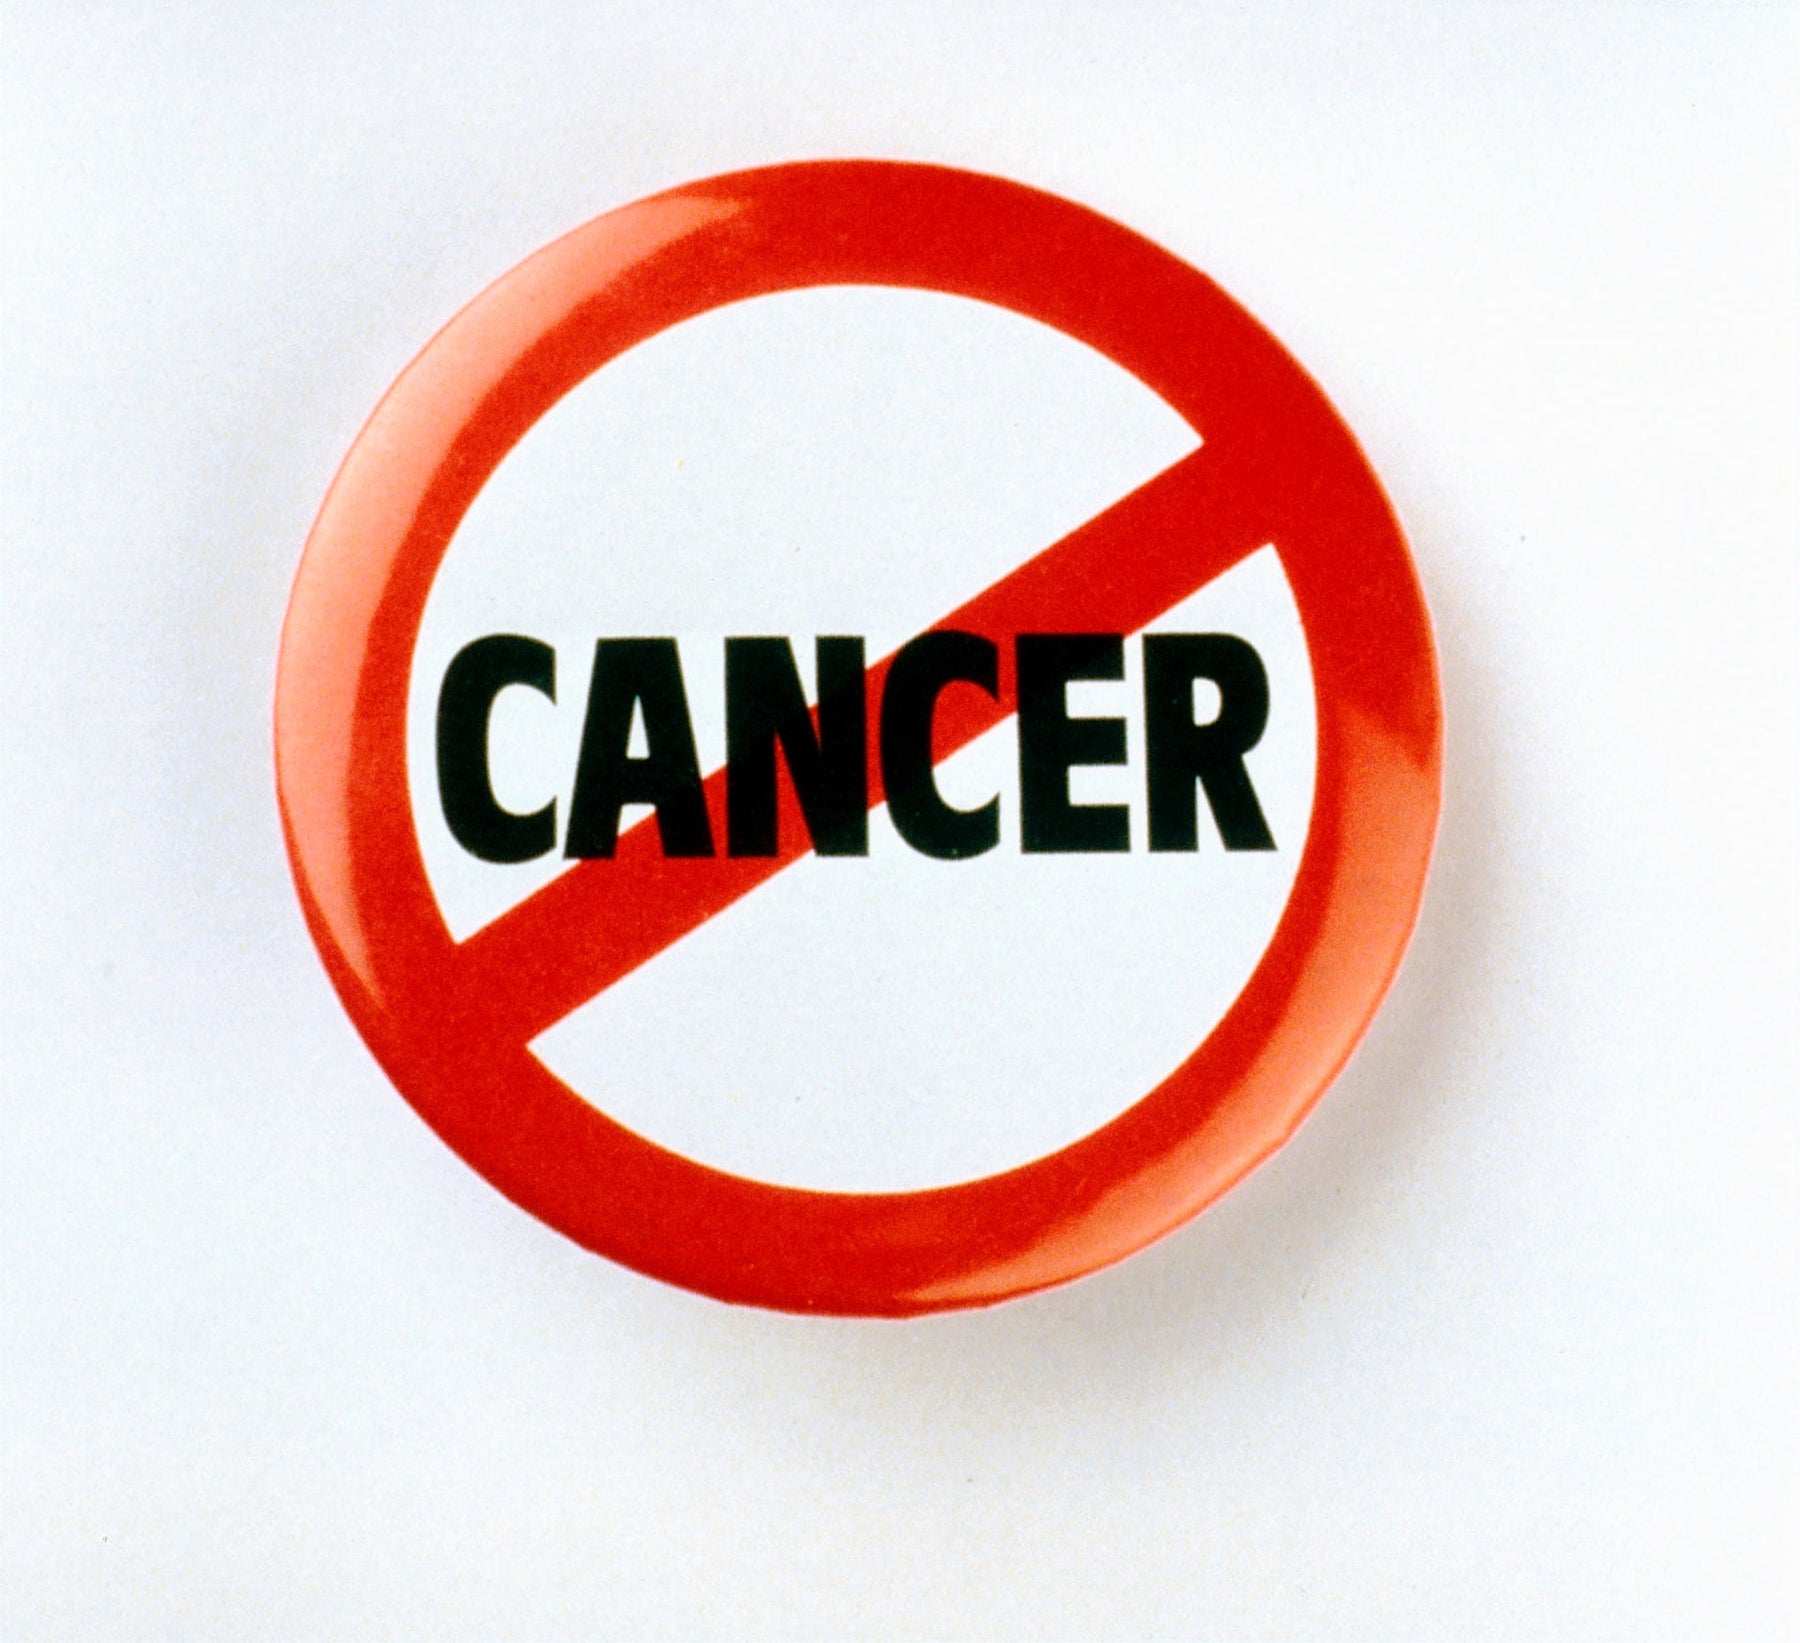 Amazing! Doctors Make Cancer Disappear Completely in Only 3 Weeks' Time